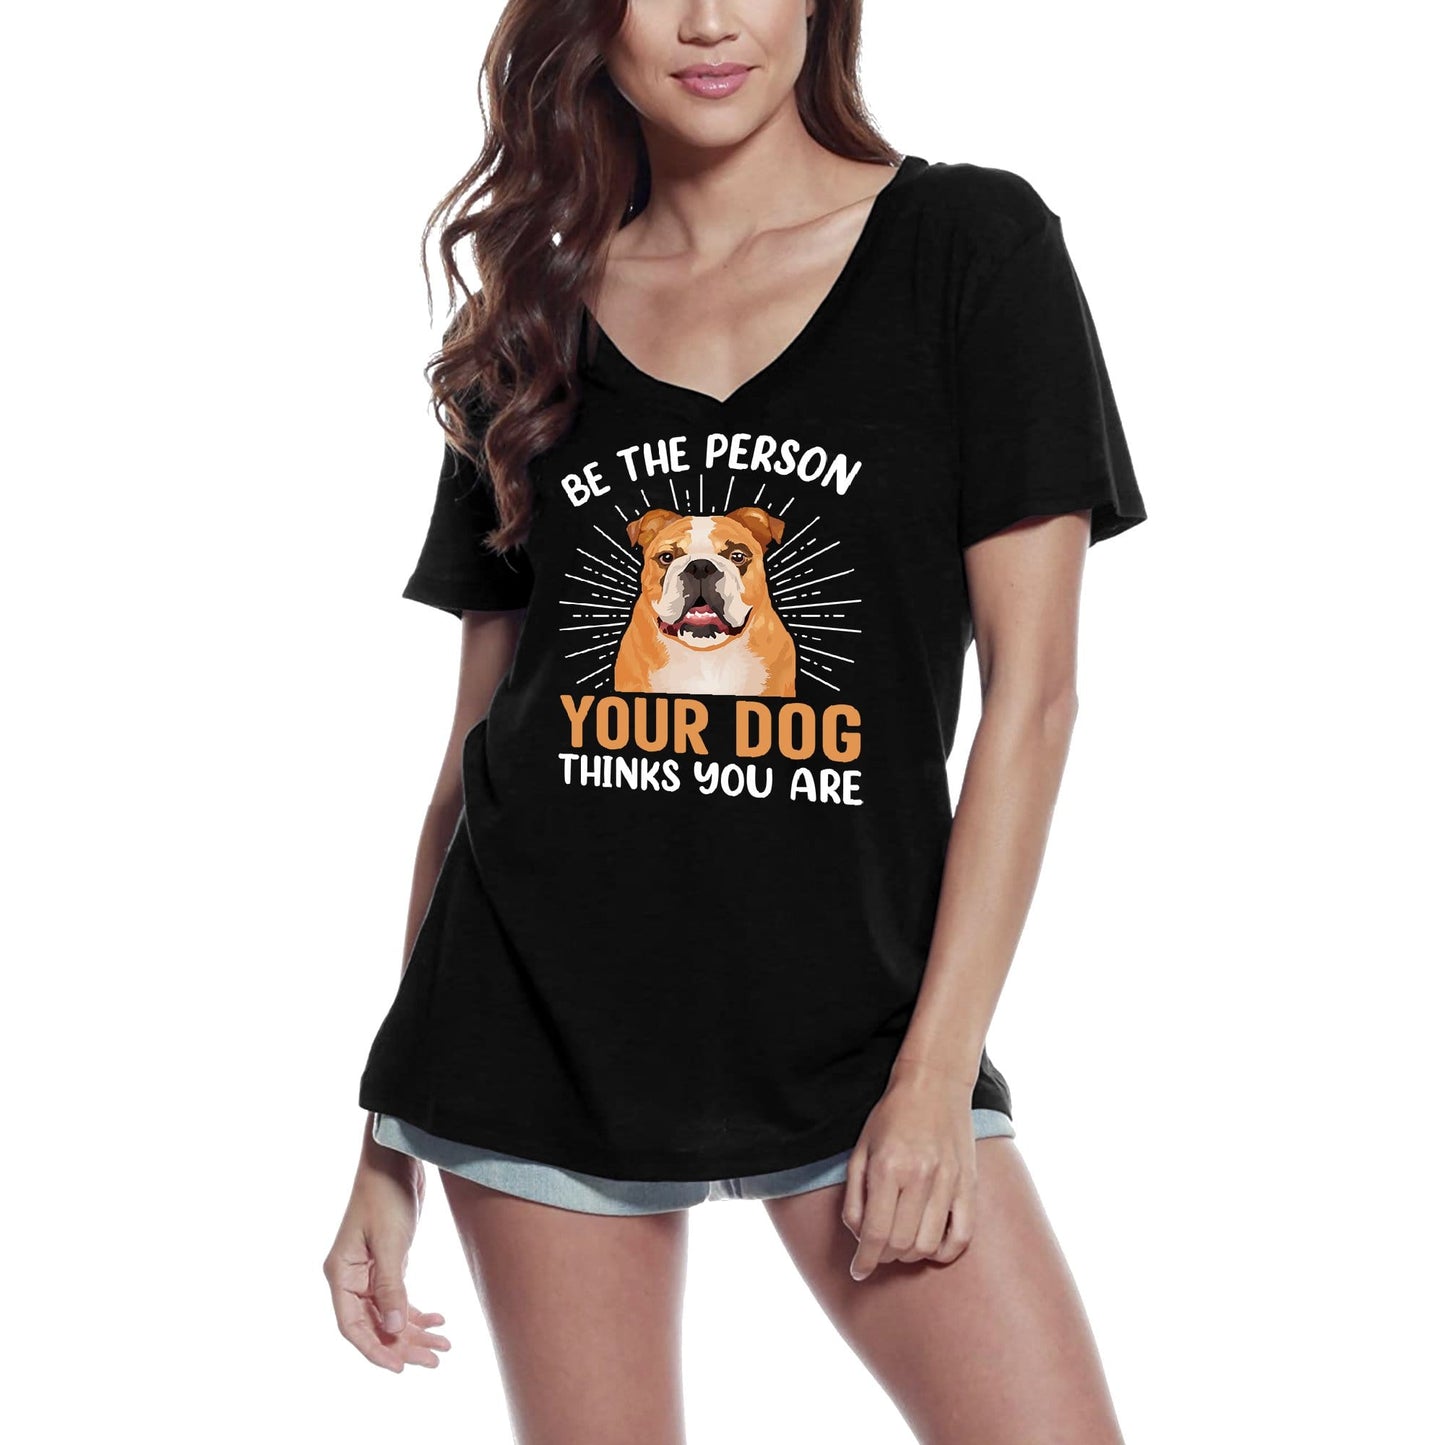 ULTRABASIC Women's T-Shirt Be The Person Your Dog Thinks You Are - Funny Dog Tee Shirt